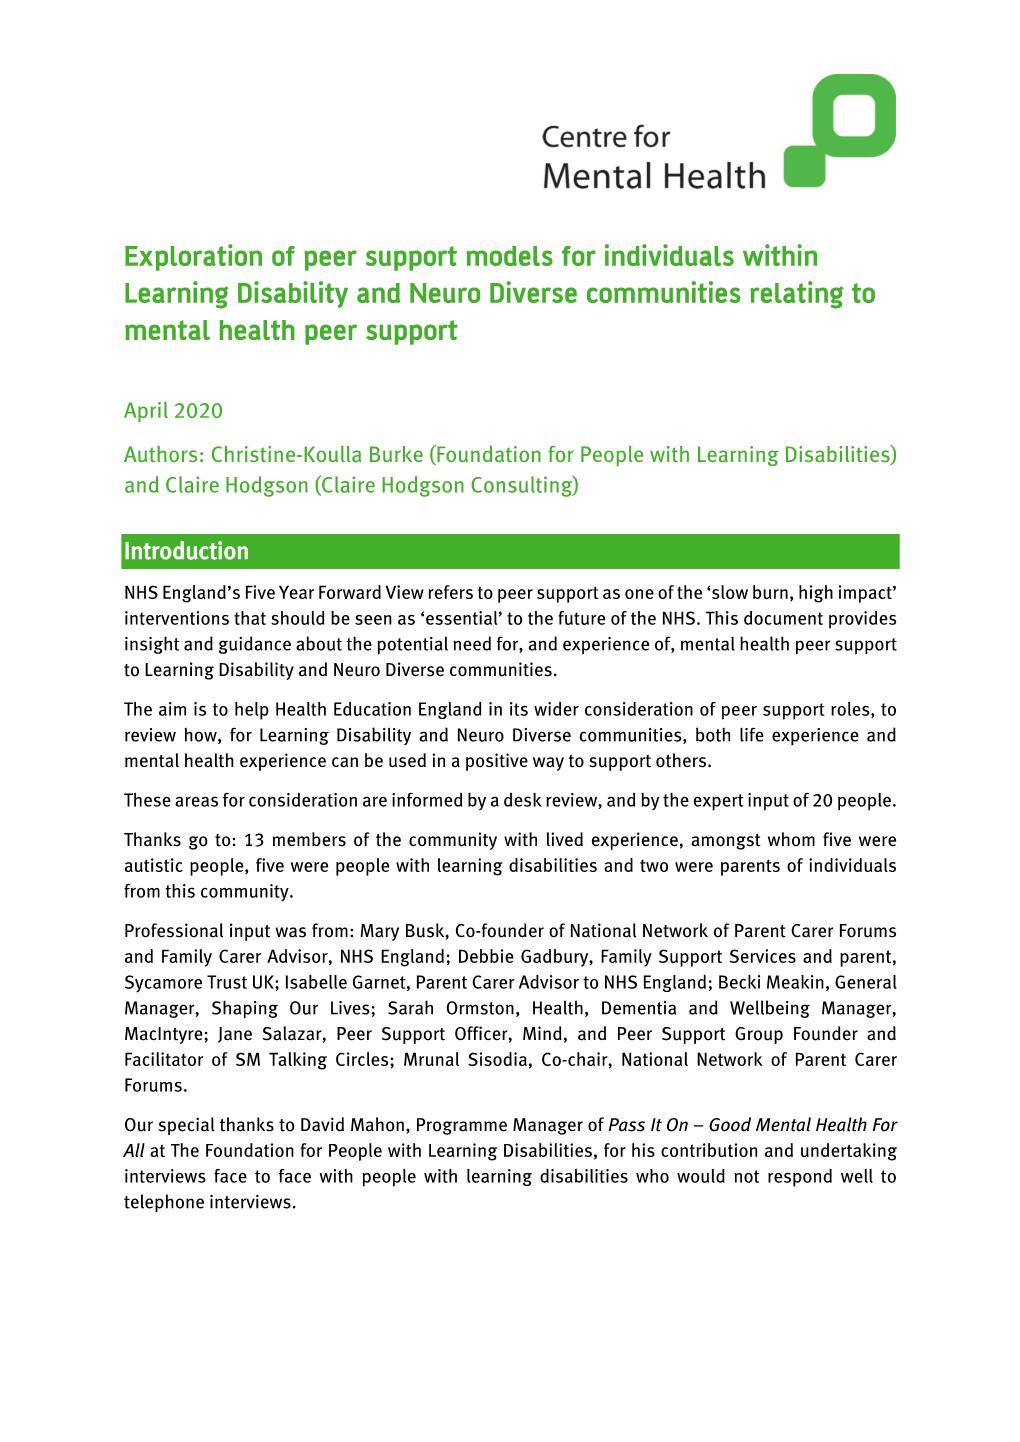 Download 'Peer Support Models for Individuals with Learning Disability